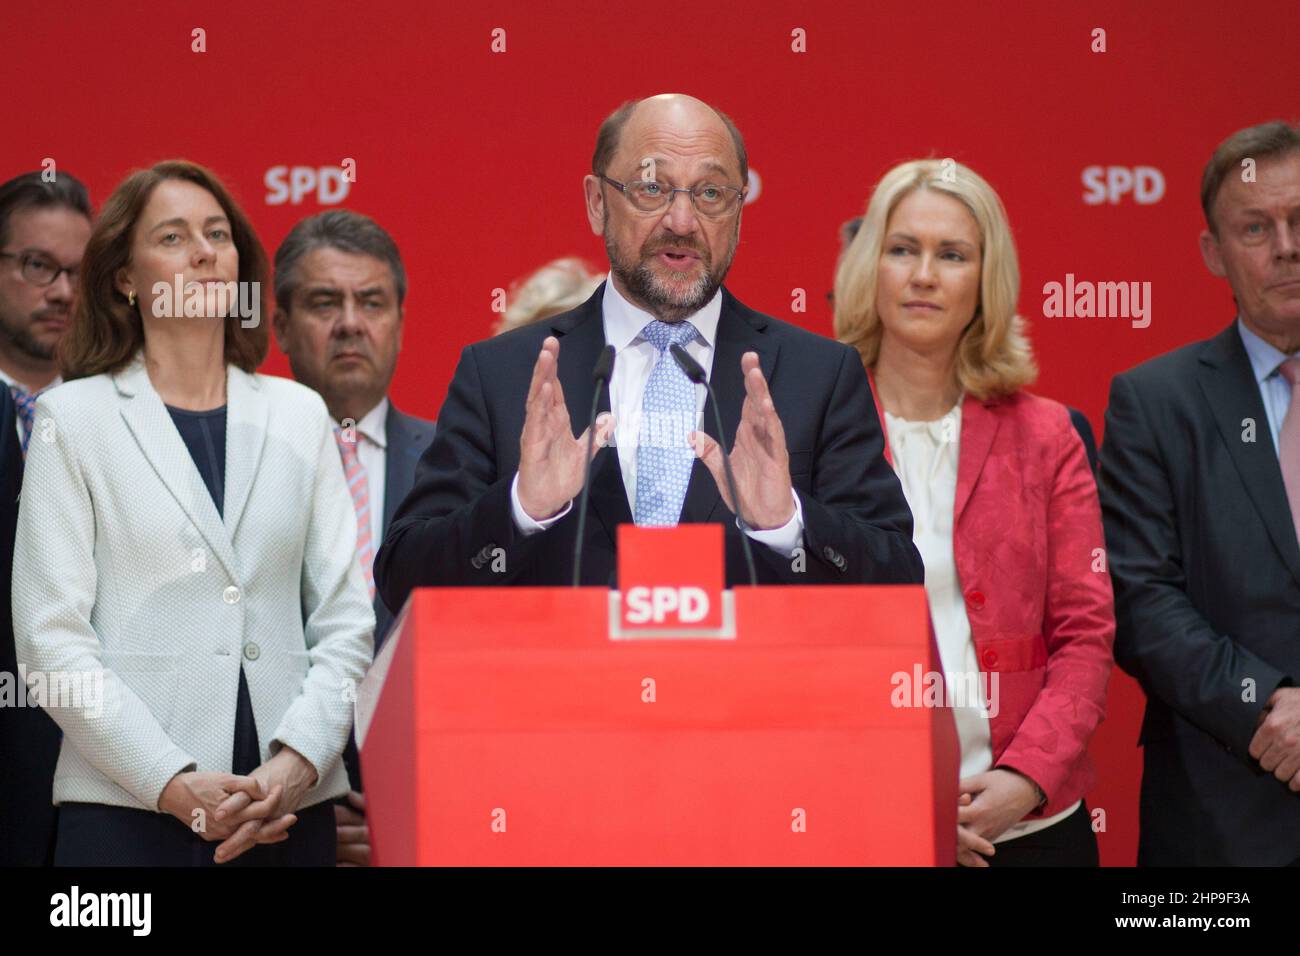 SPD Chancellor candidate Martin Schulz and the SPD candidate to the German state of NRW, Hannelore Kraft are addressing his party's supporters and members of the press the day  after the local elections in  North Rhine-Westphalia, on May 15, 2017. (Photo by Omer Messinger) Stock Photo